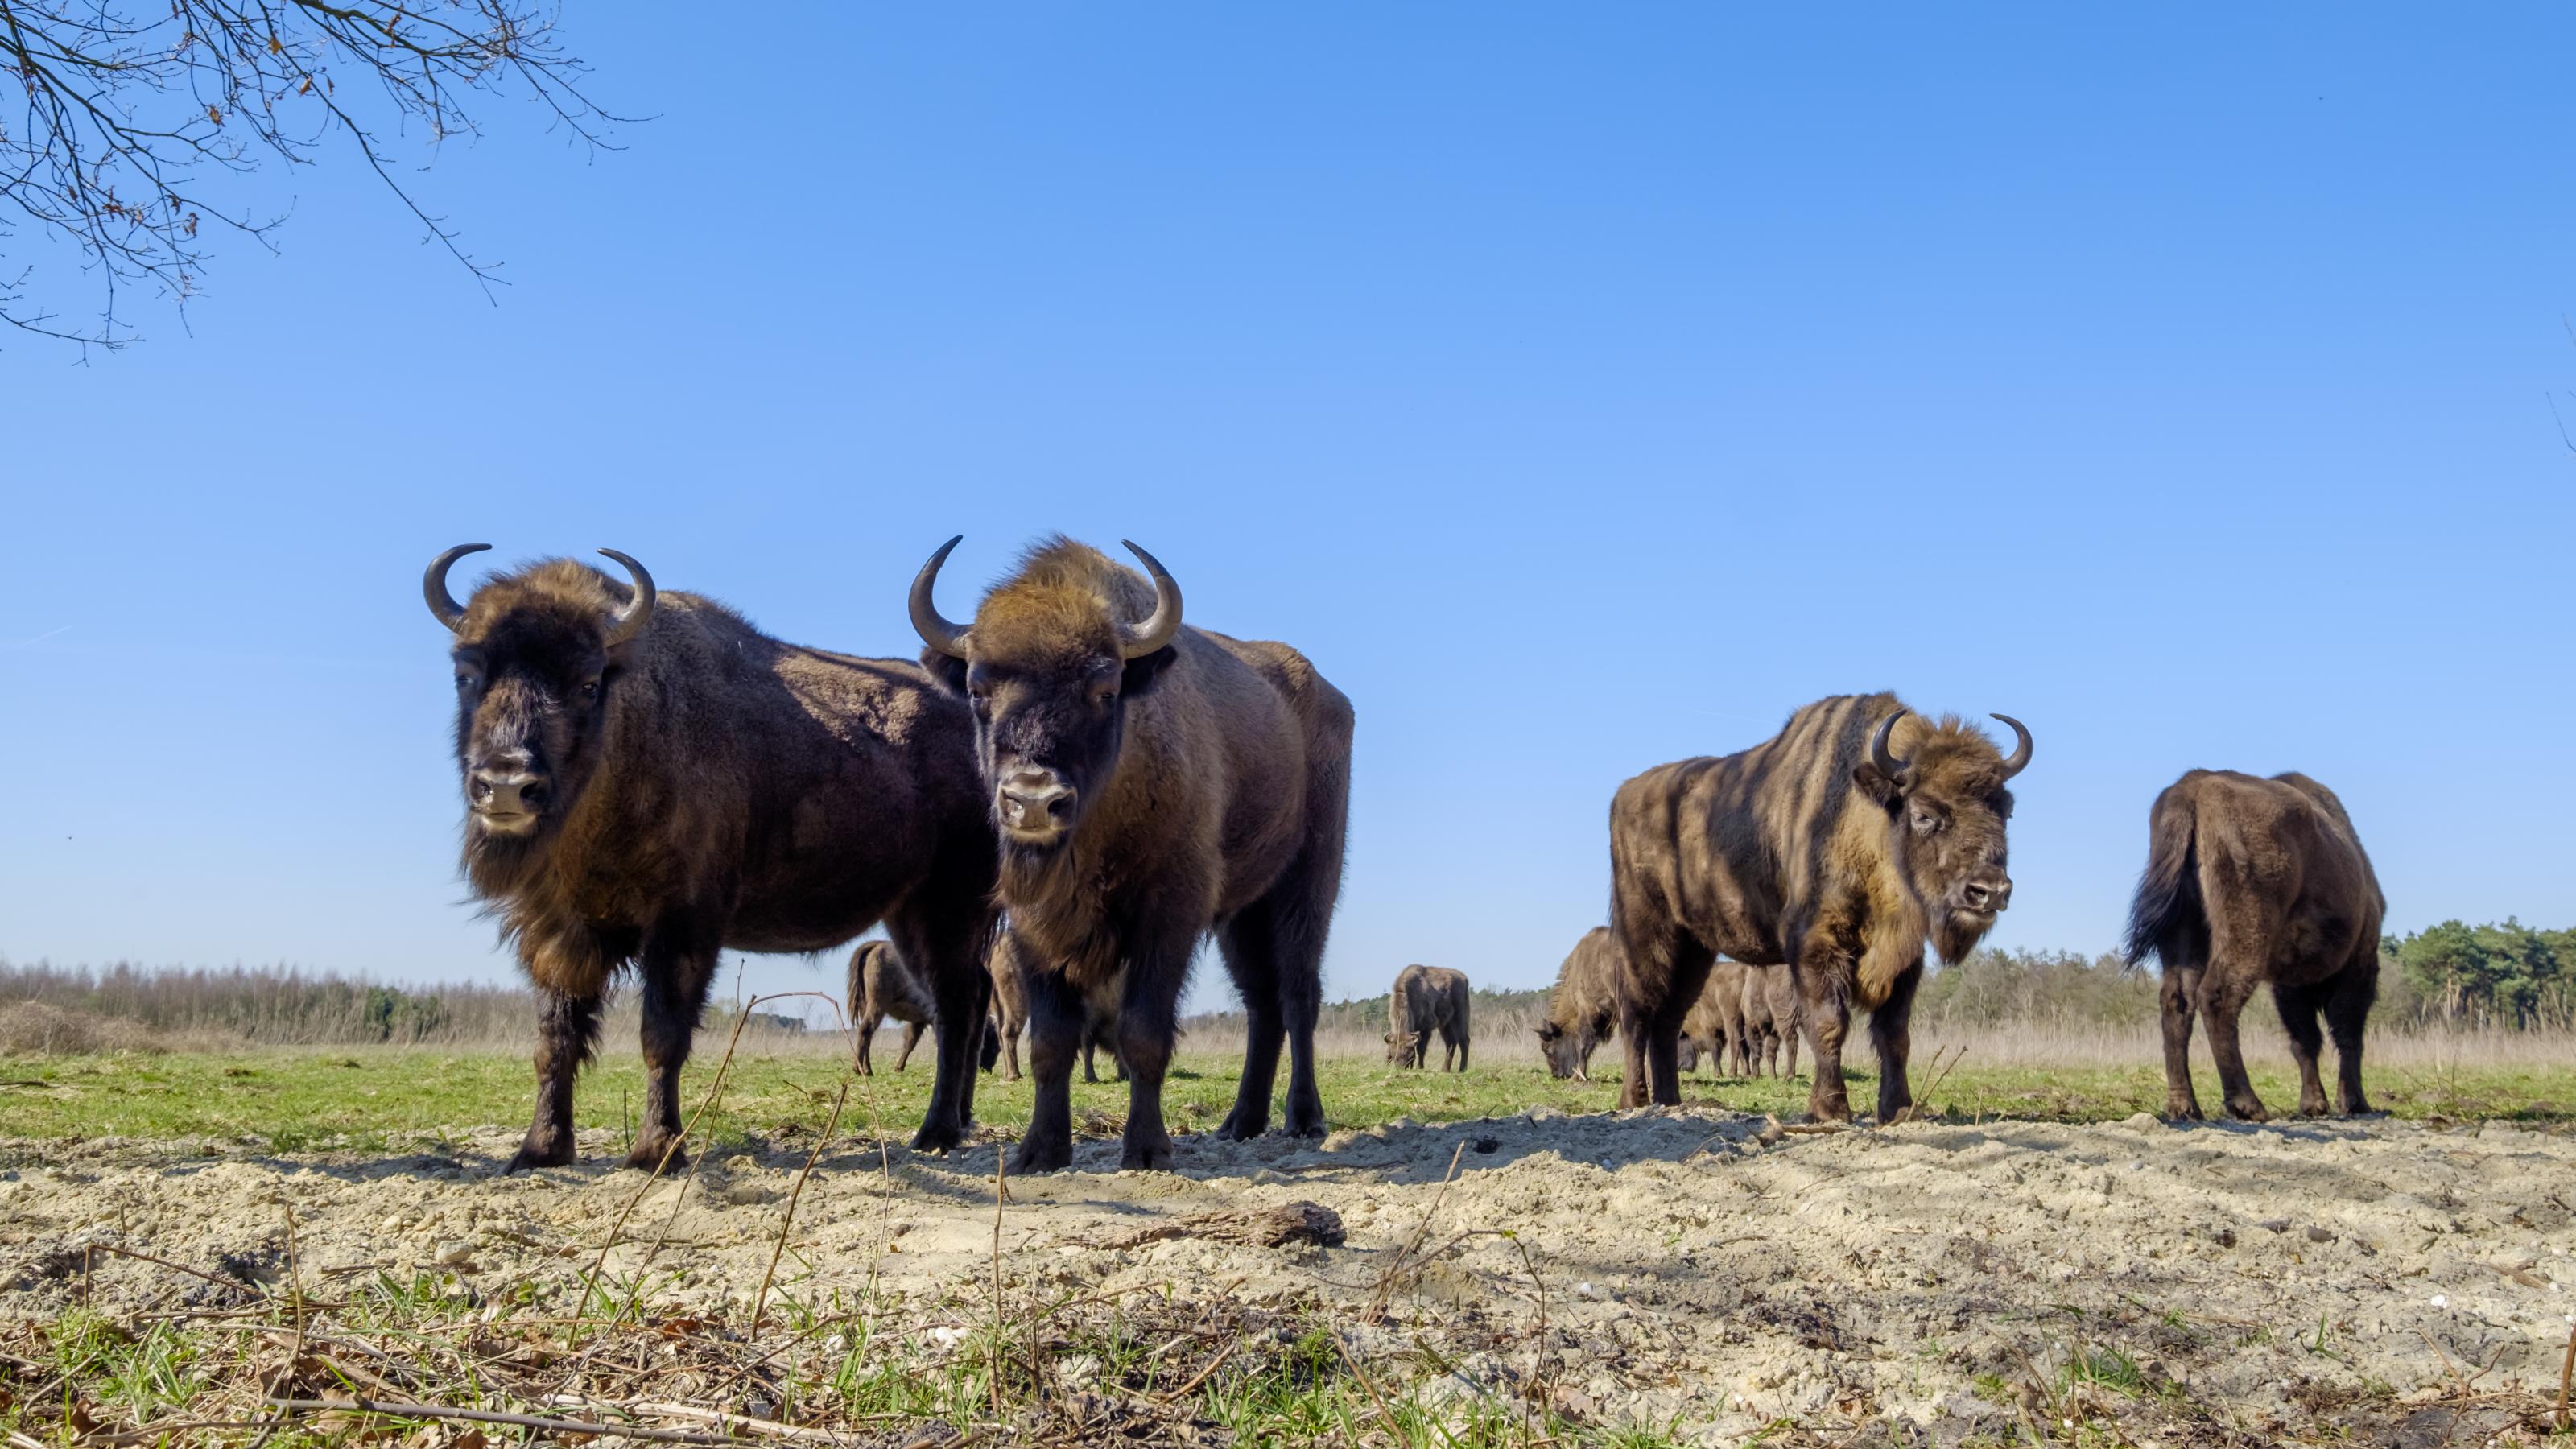 a wisent The European bison stands in the natural park of the Maashorst, Netherlands